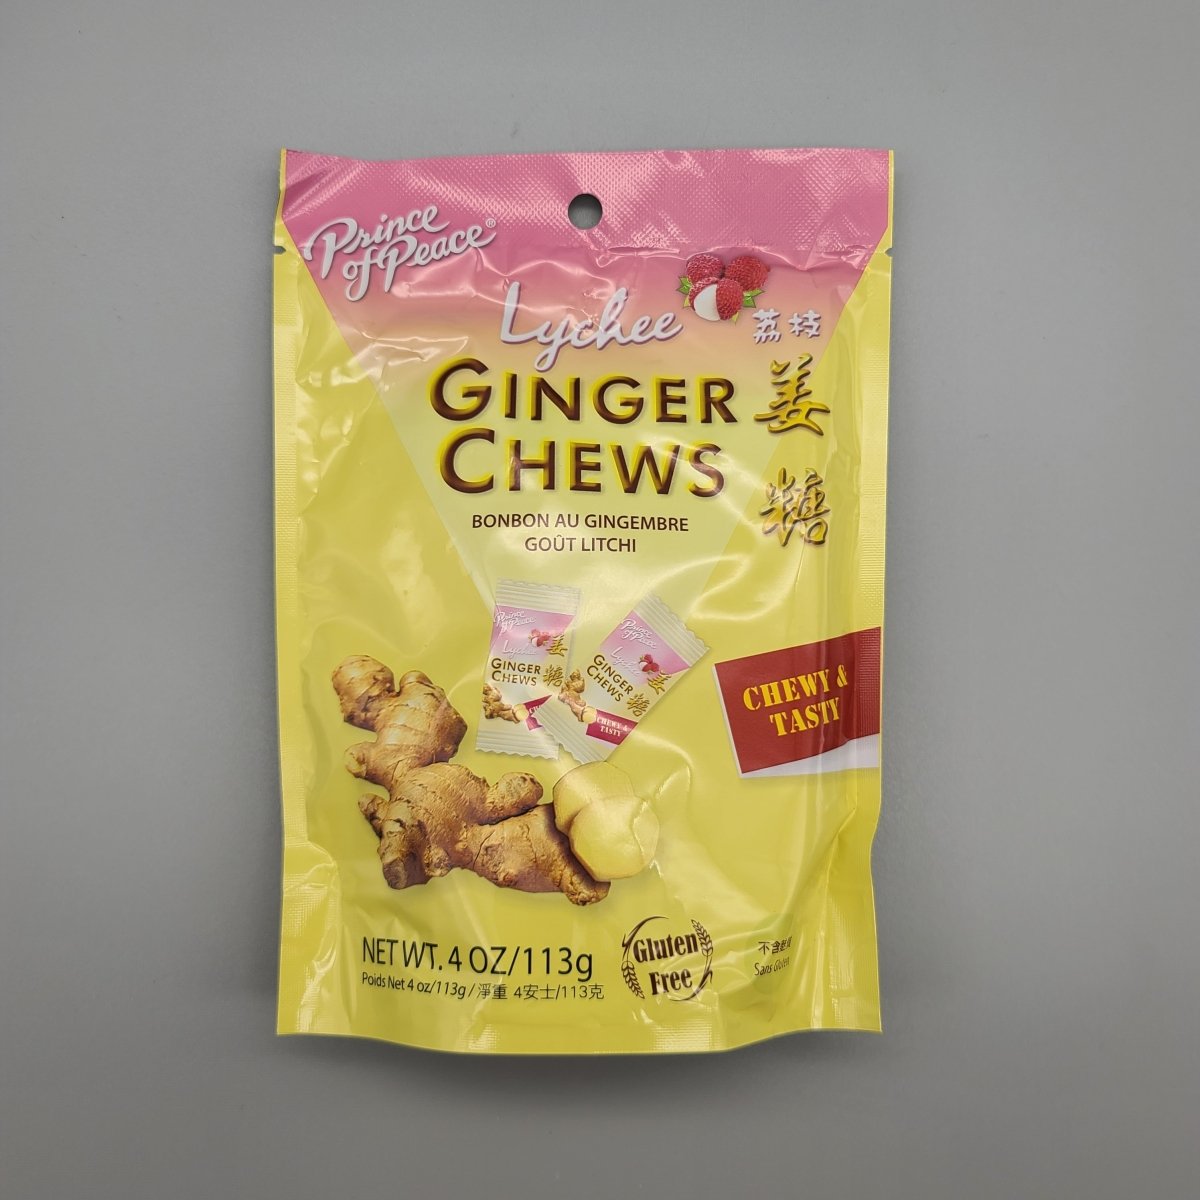 Ginger Chews- Lychee Flavor-100% Natural- 4oz